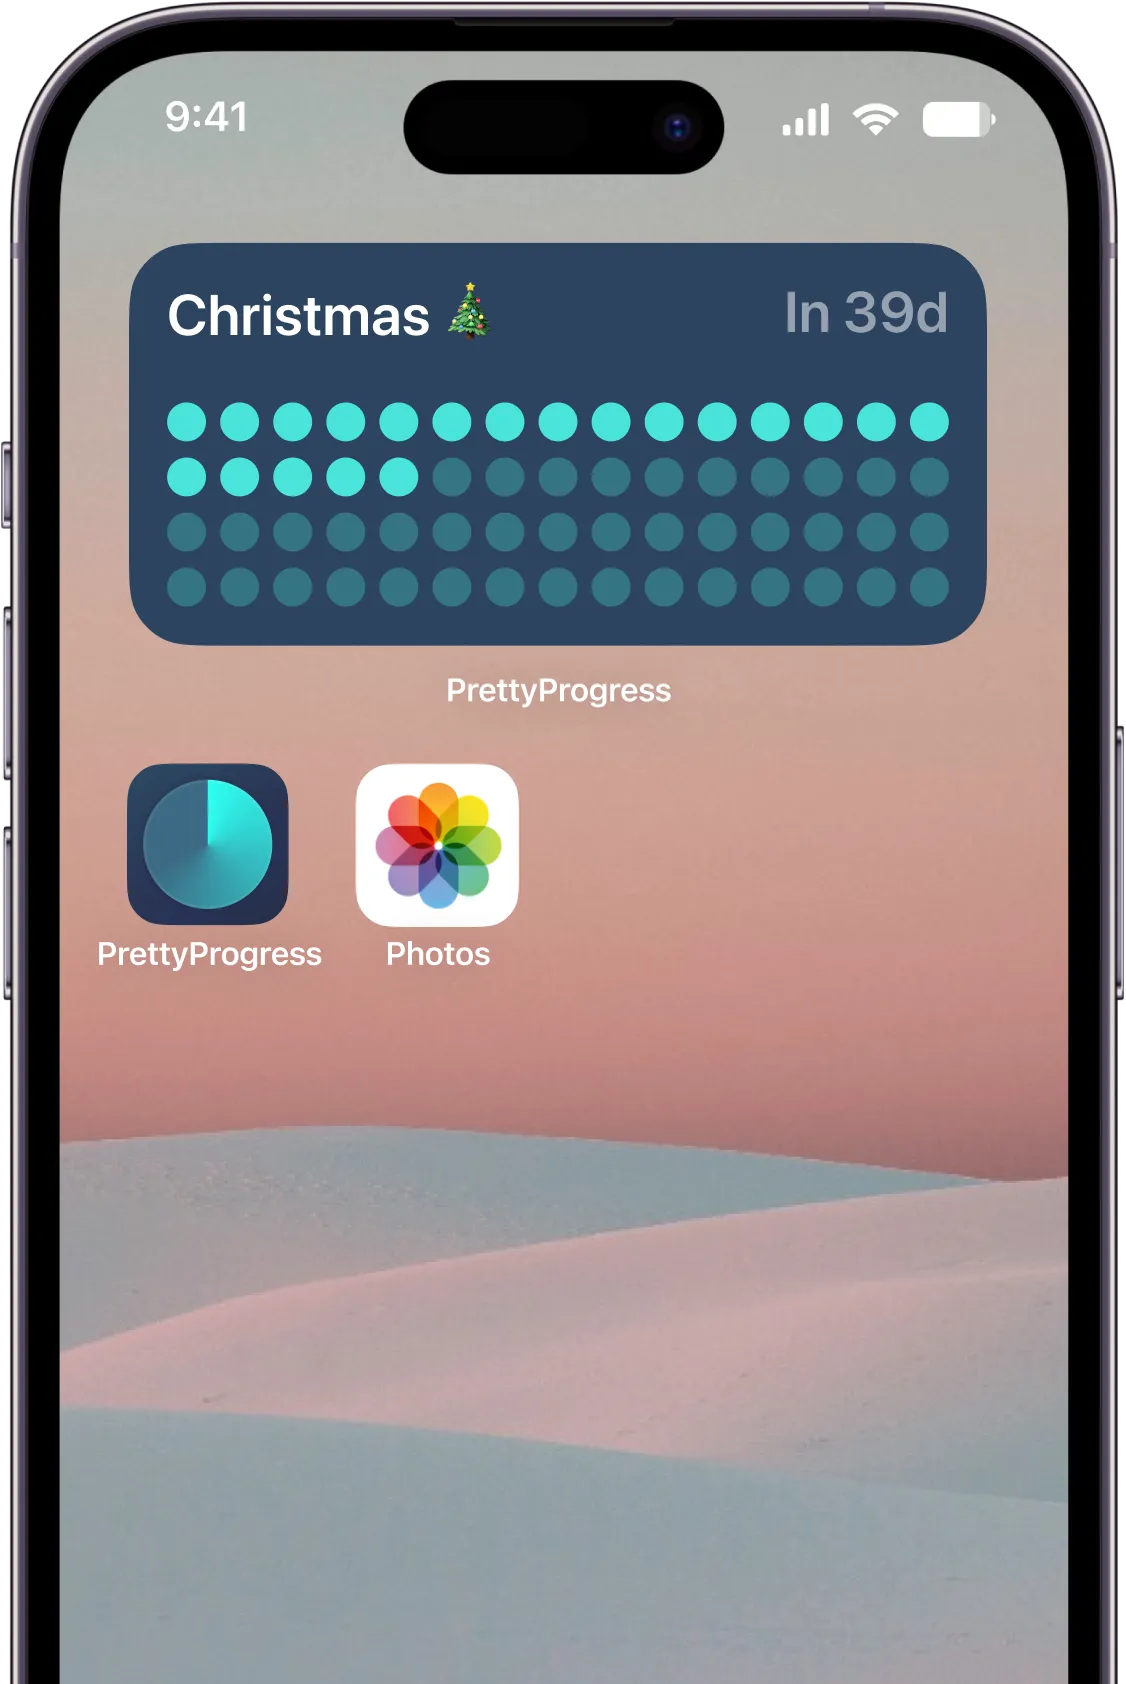 iPhone showing a Christmas countdown widget on its Home Screen